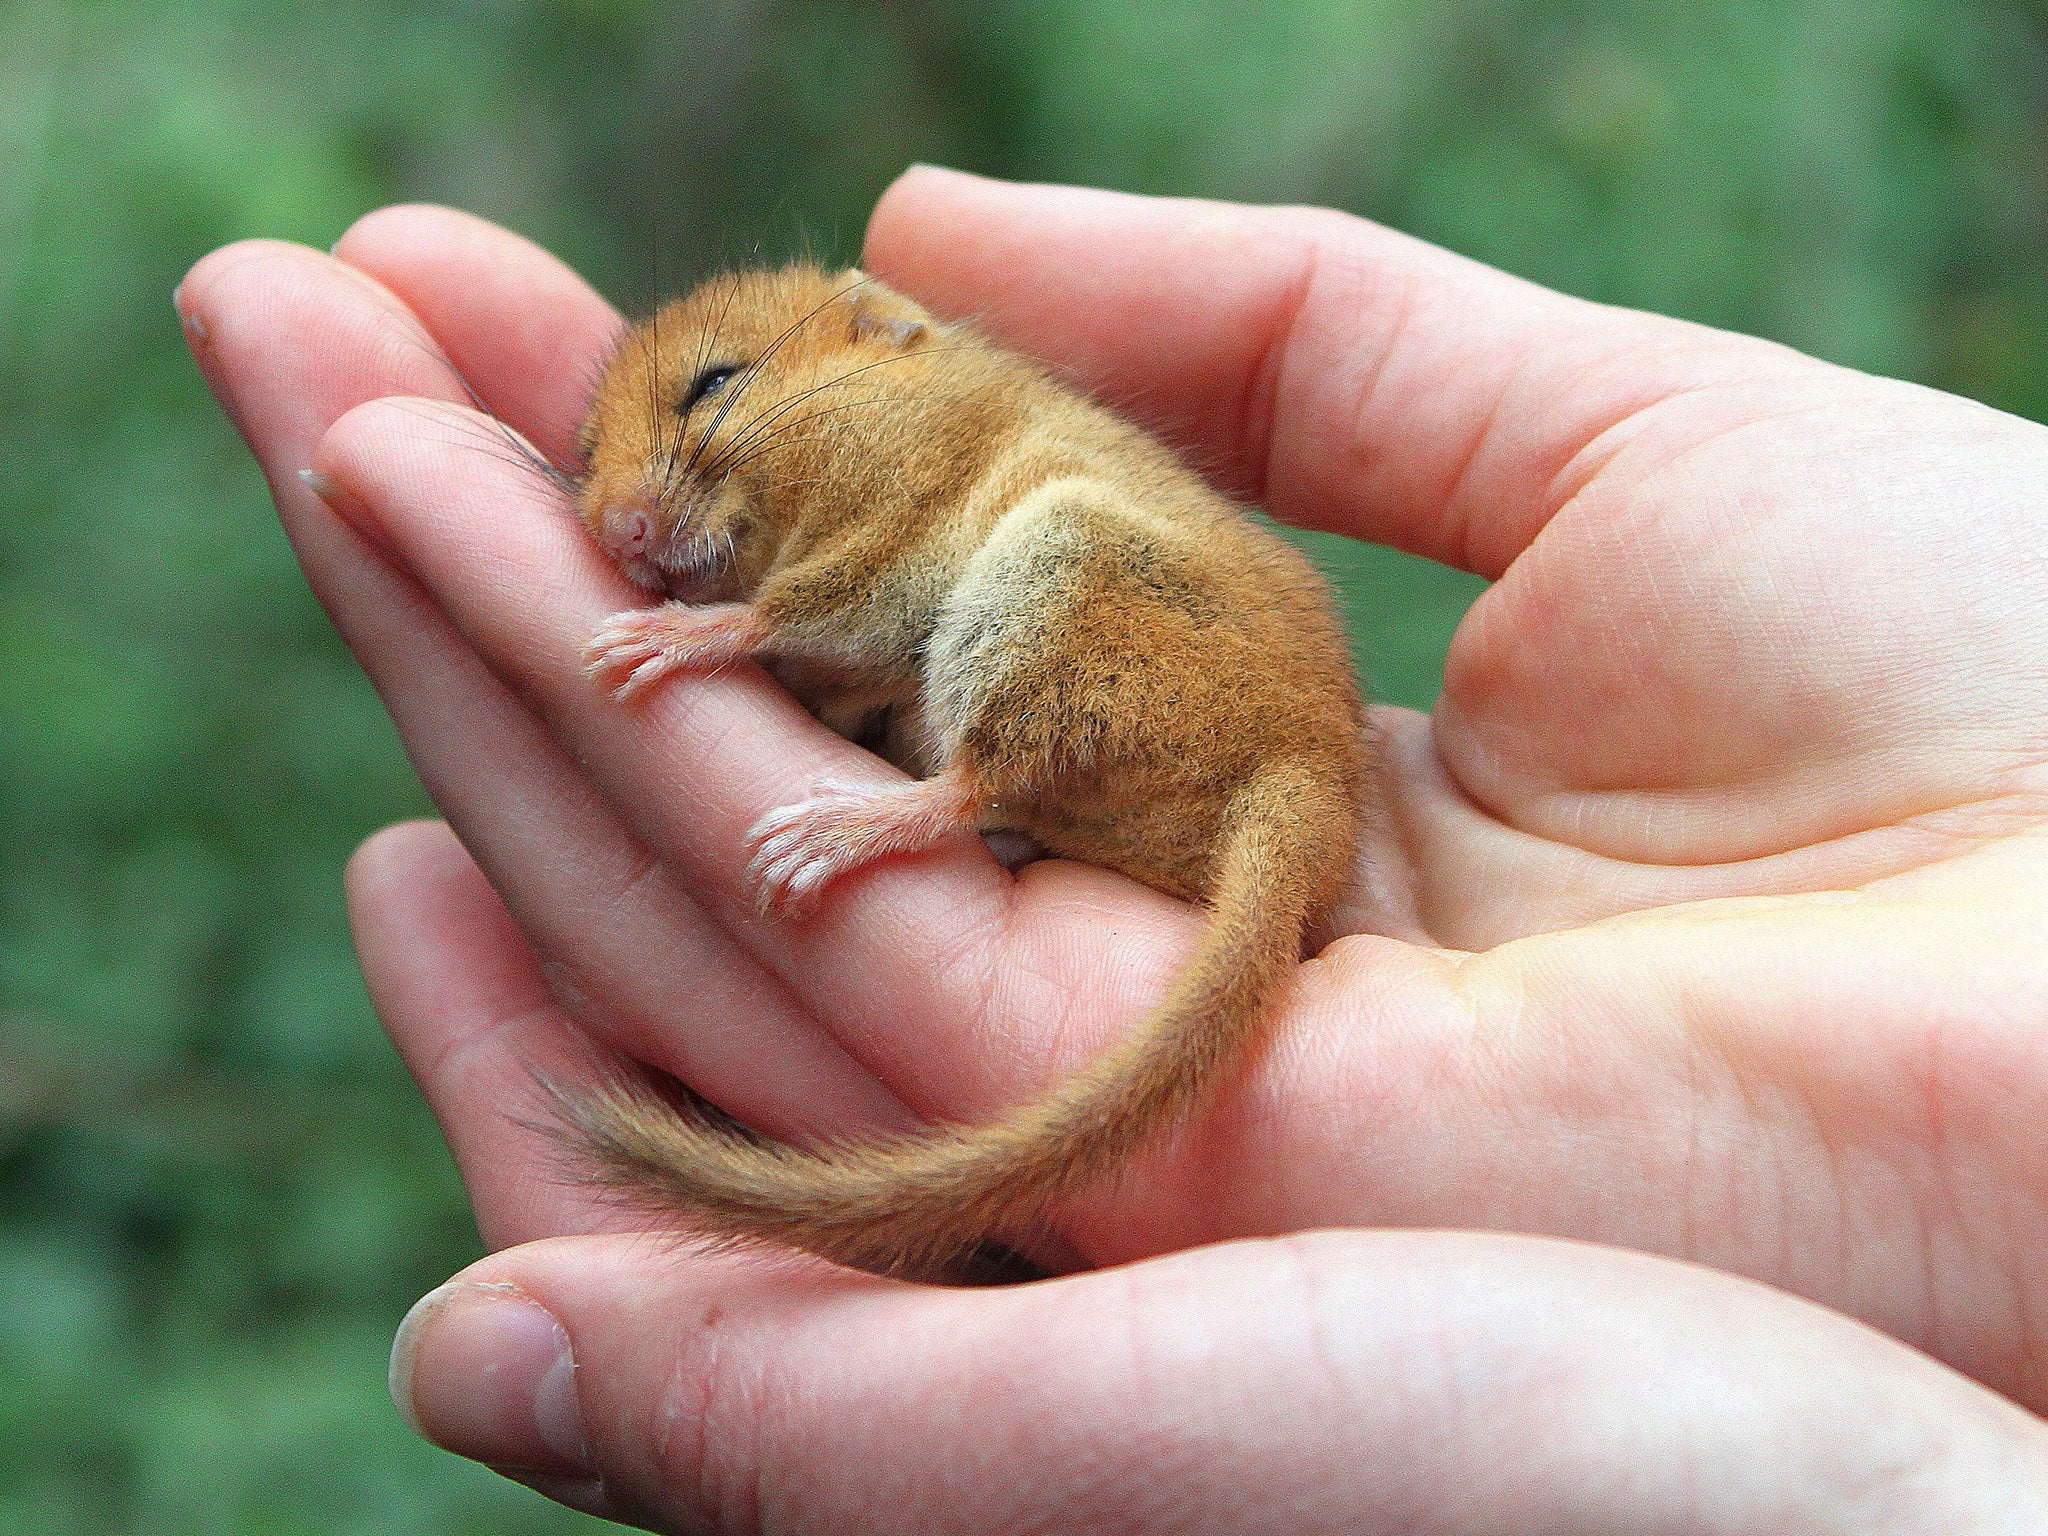 More coppicing of trees in Britain’s woodlands could help revive dormouse numbers which have fallen at an alarming rate in recent years